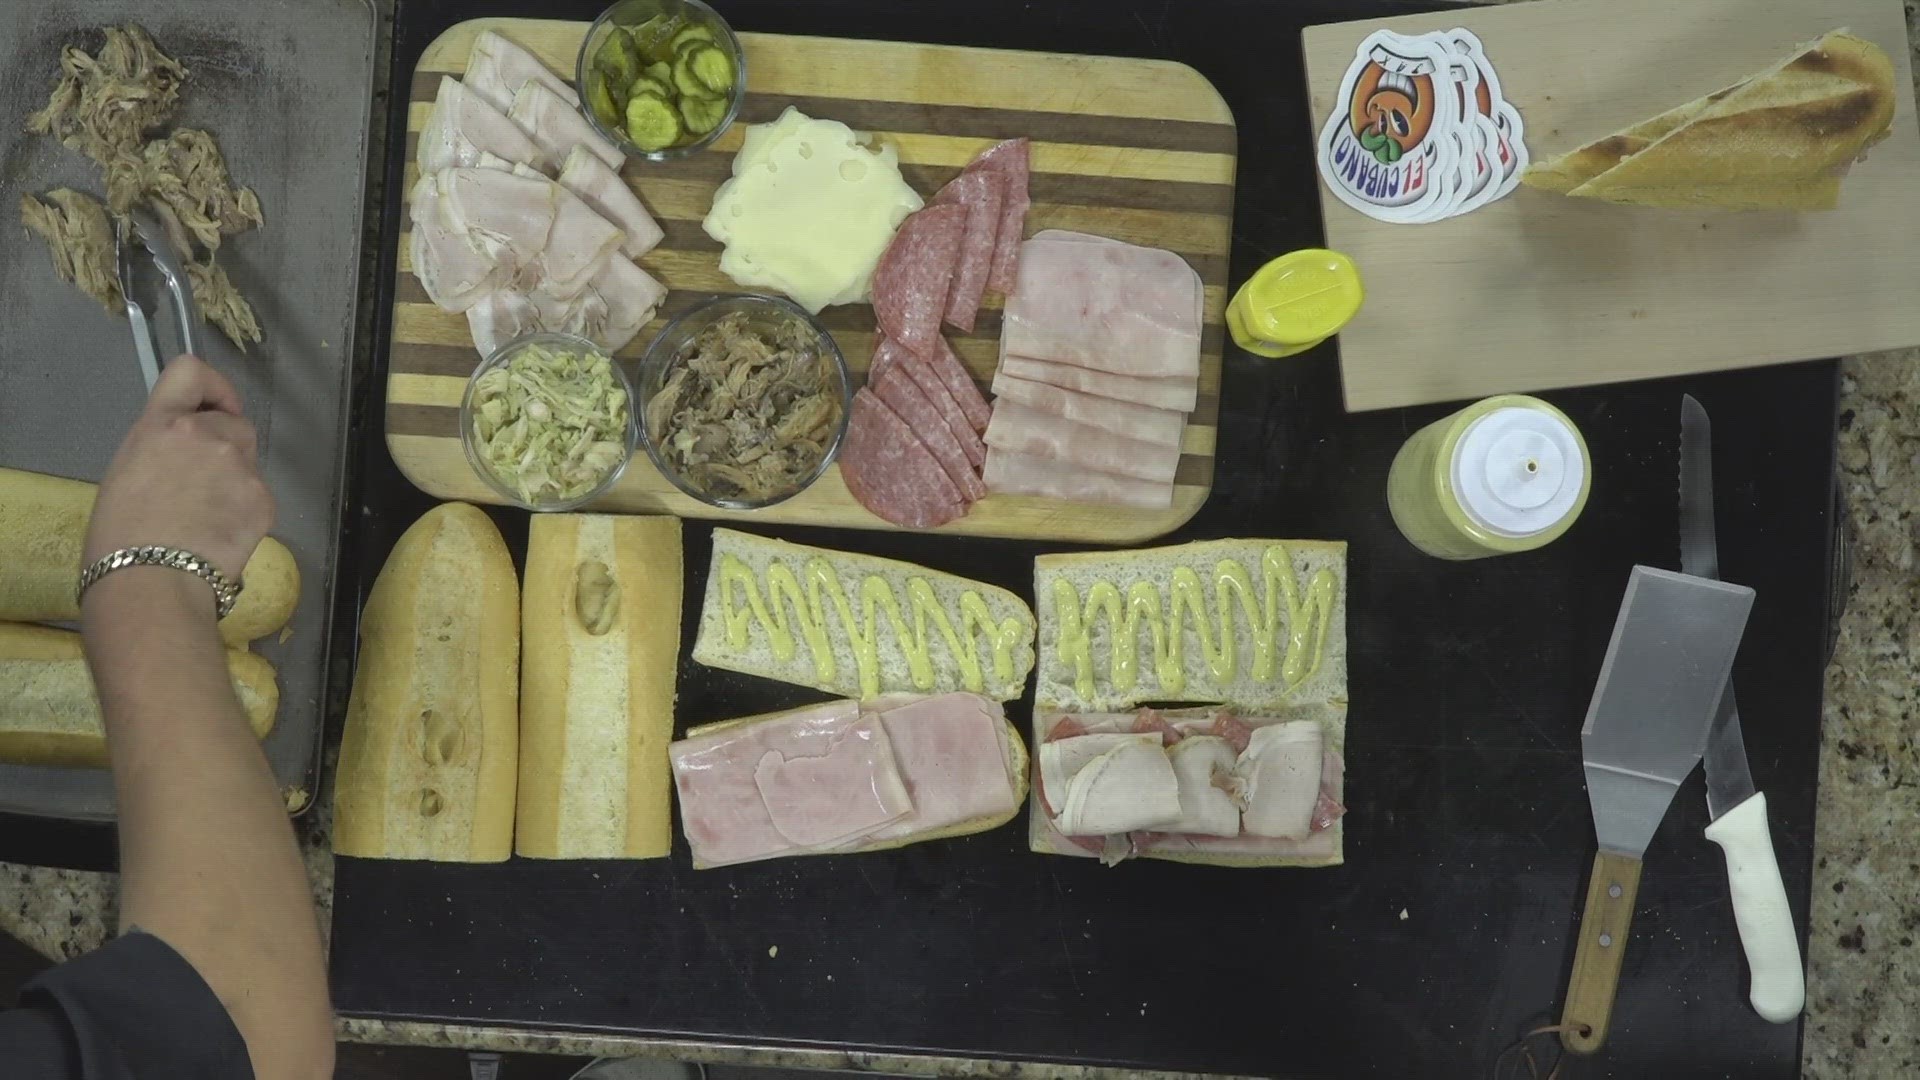 Chef Estaban of El Cubano Jax, located at Lemon Street Brewing Co. in Jacksonville, talks the difference between a Tampa and Miami Cuban sandwich while cooking both.